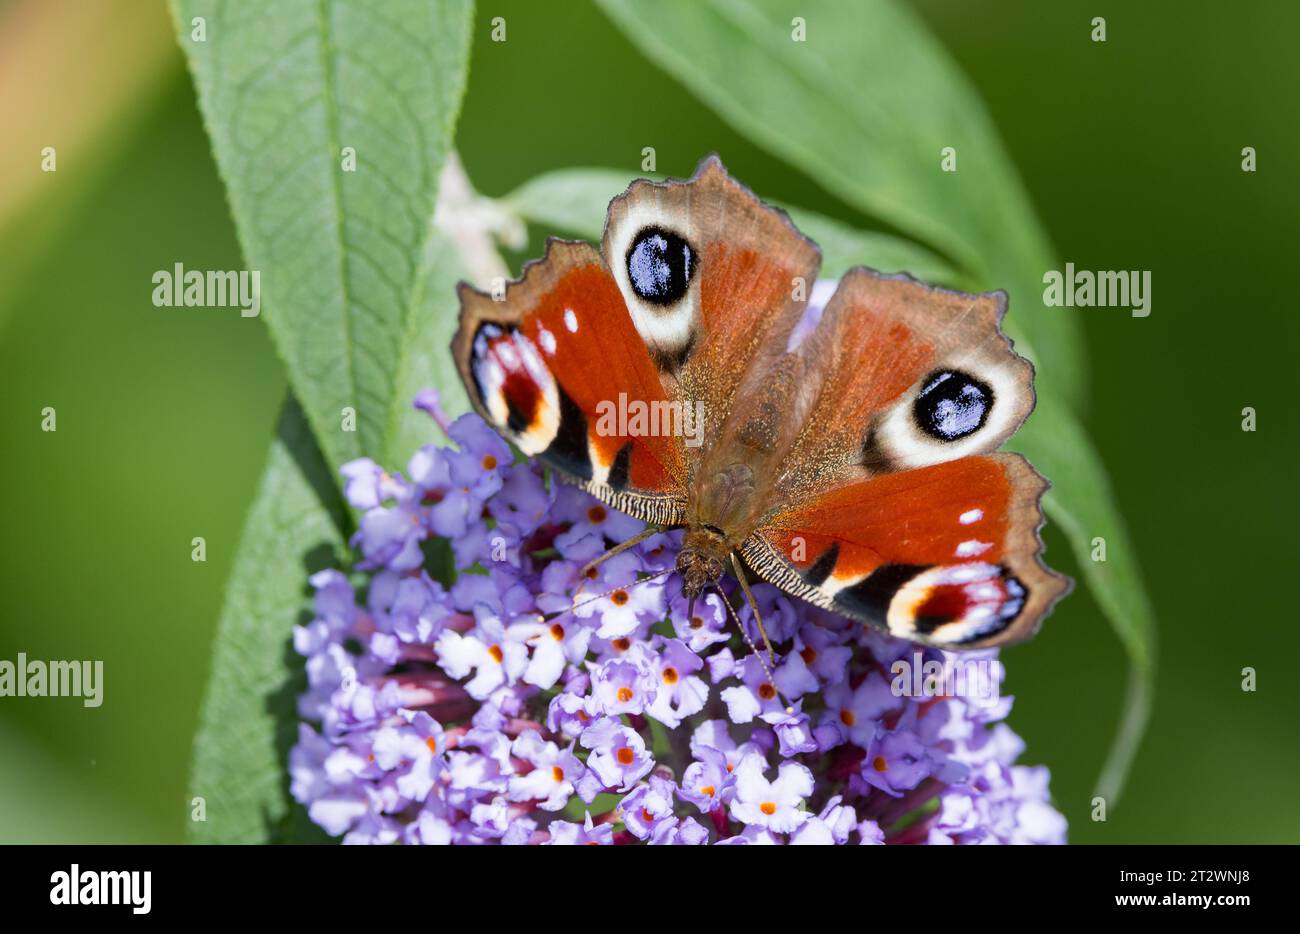 Peacock Butterfly [ Aglais io ] from above on Buddleia flower Stock Photo